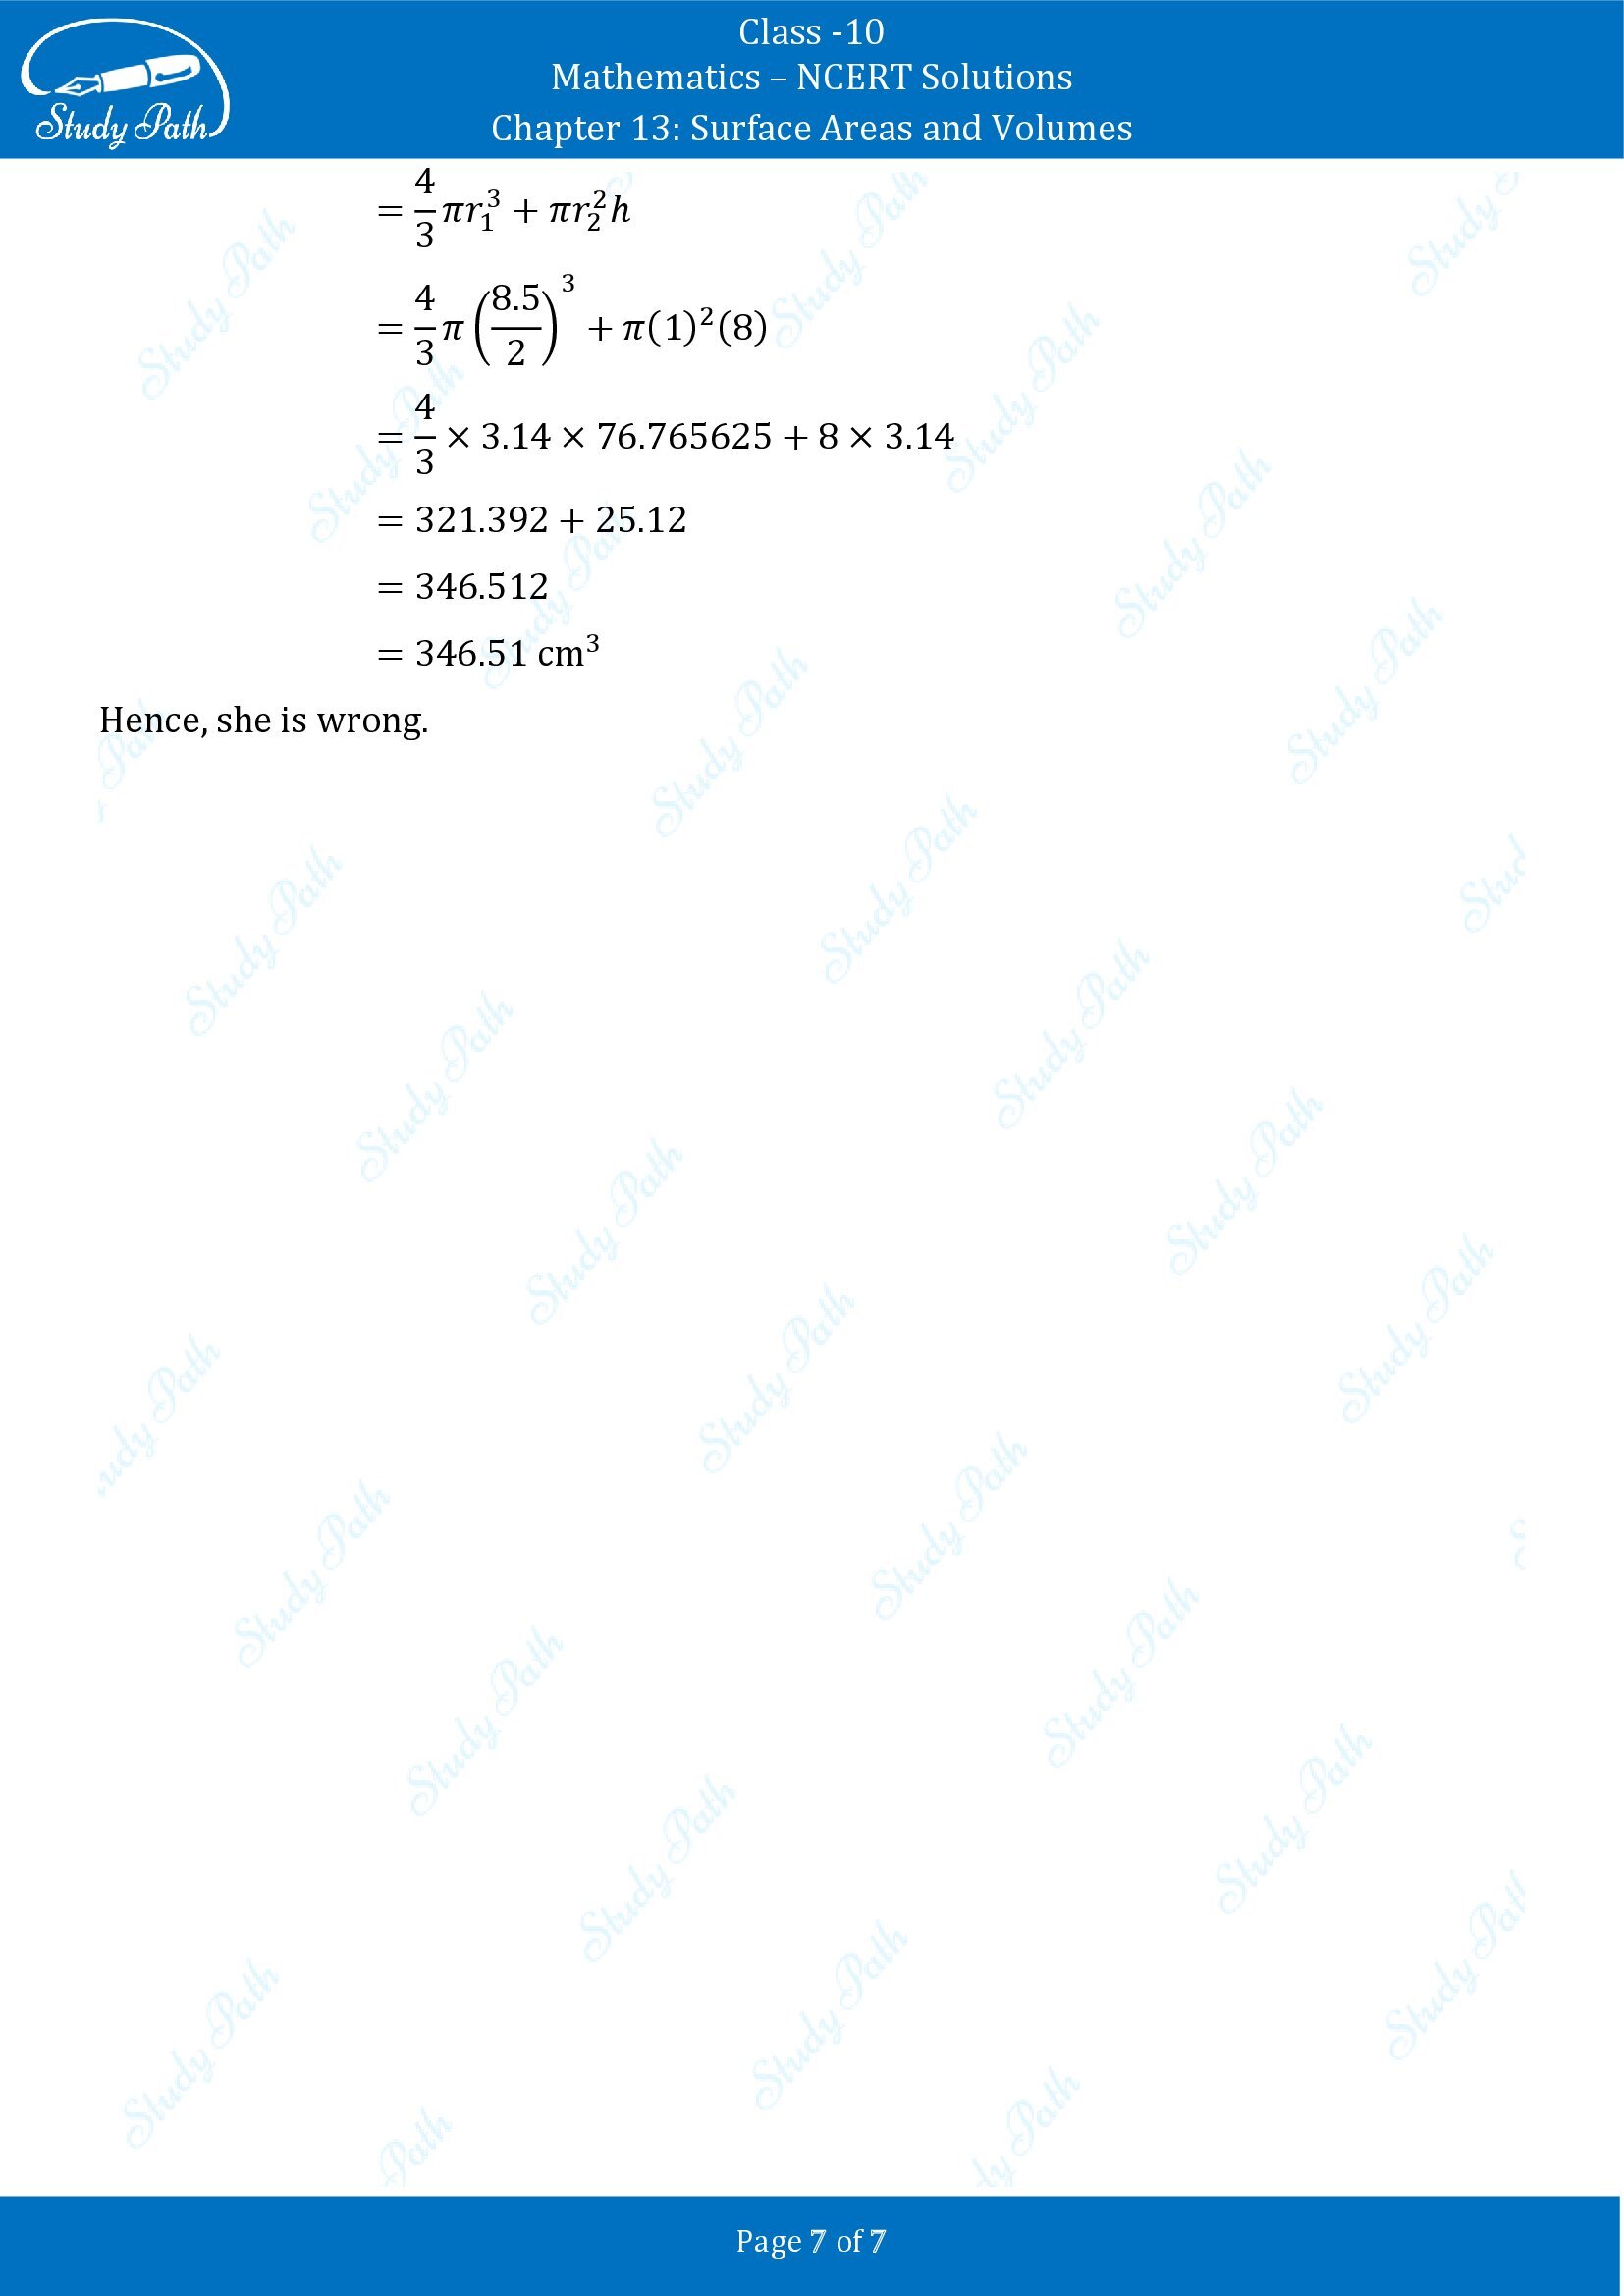 NCERT Solutions for Class 10 Maths Chapter 13 Surface Areas and Volumes Exercise 13.2 00007